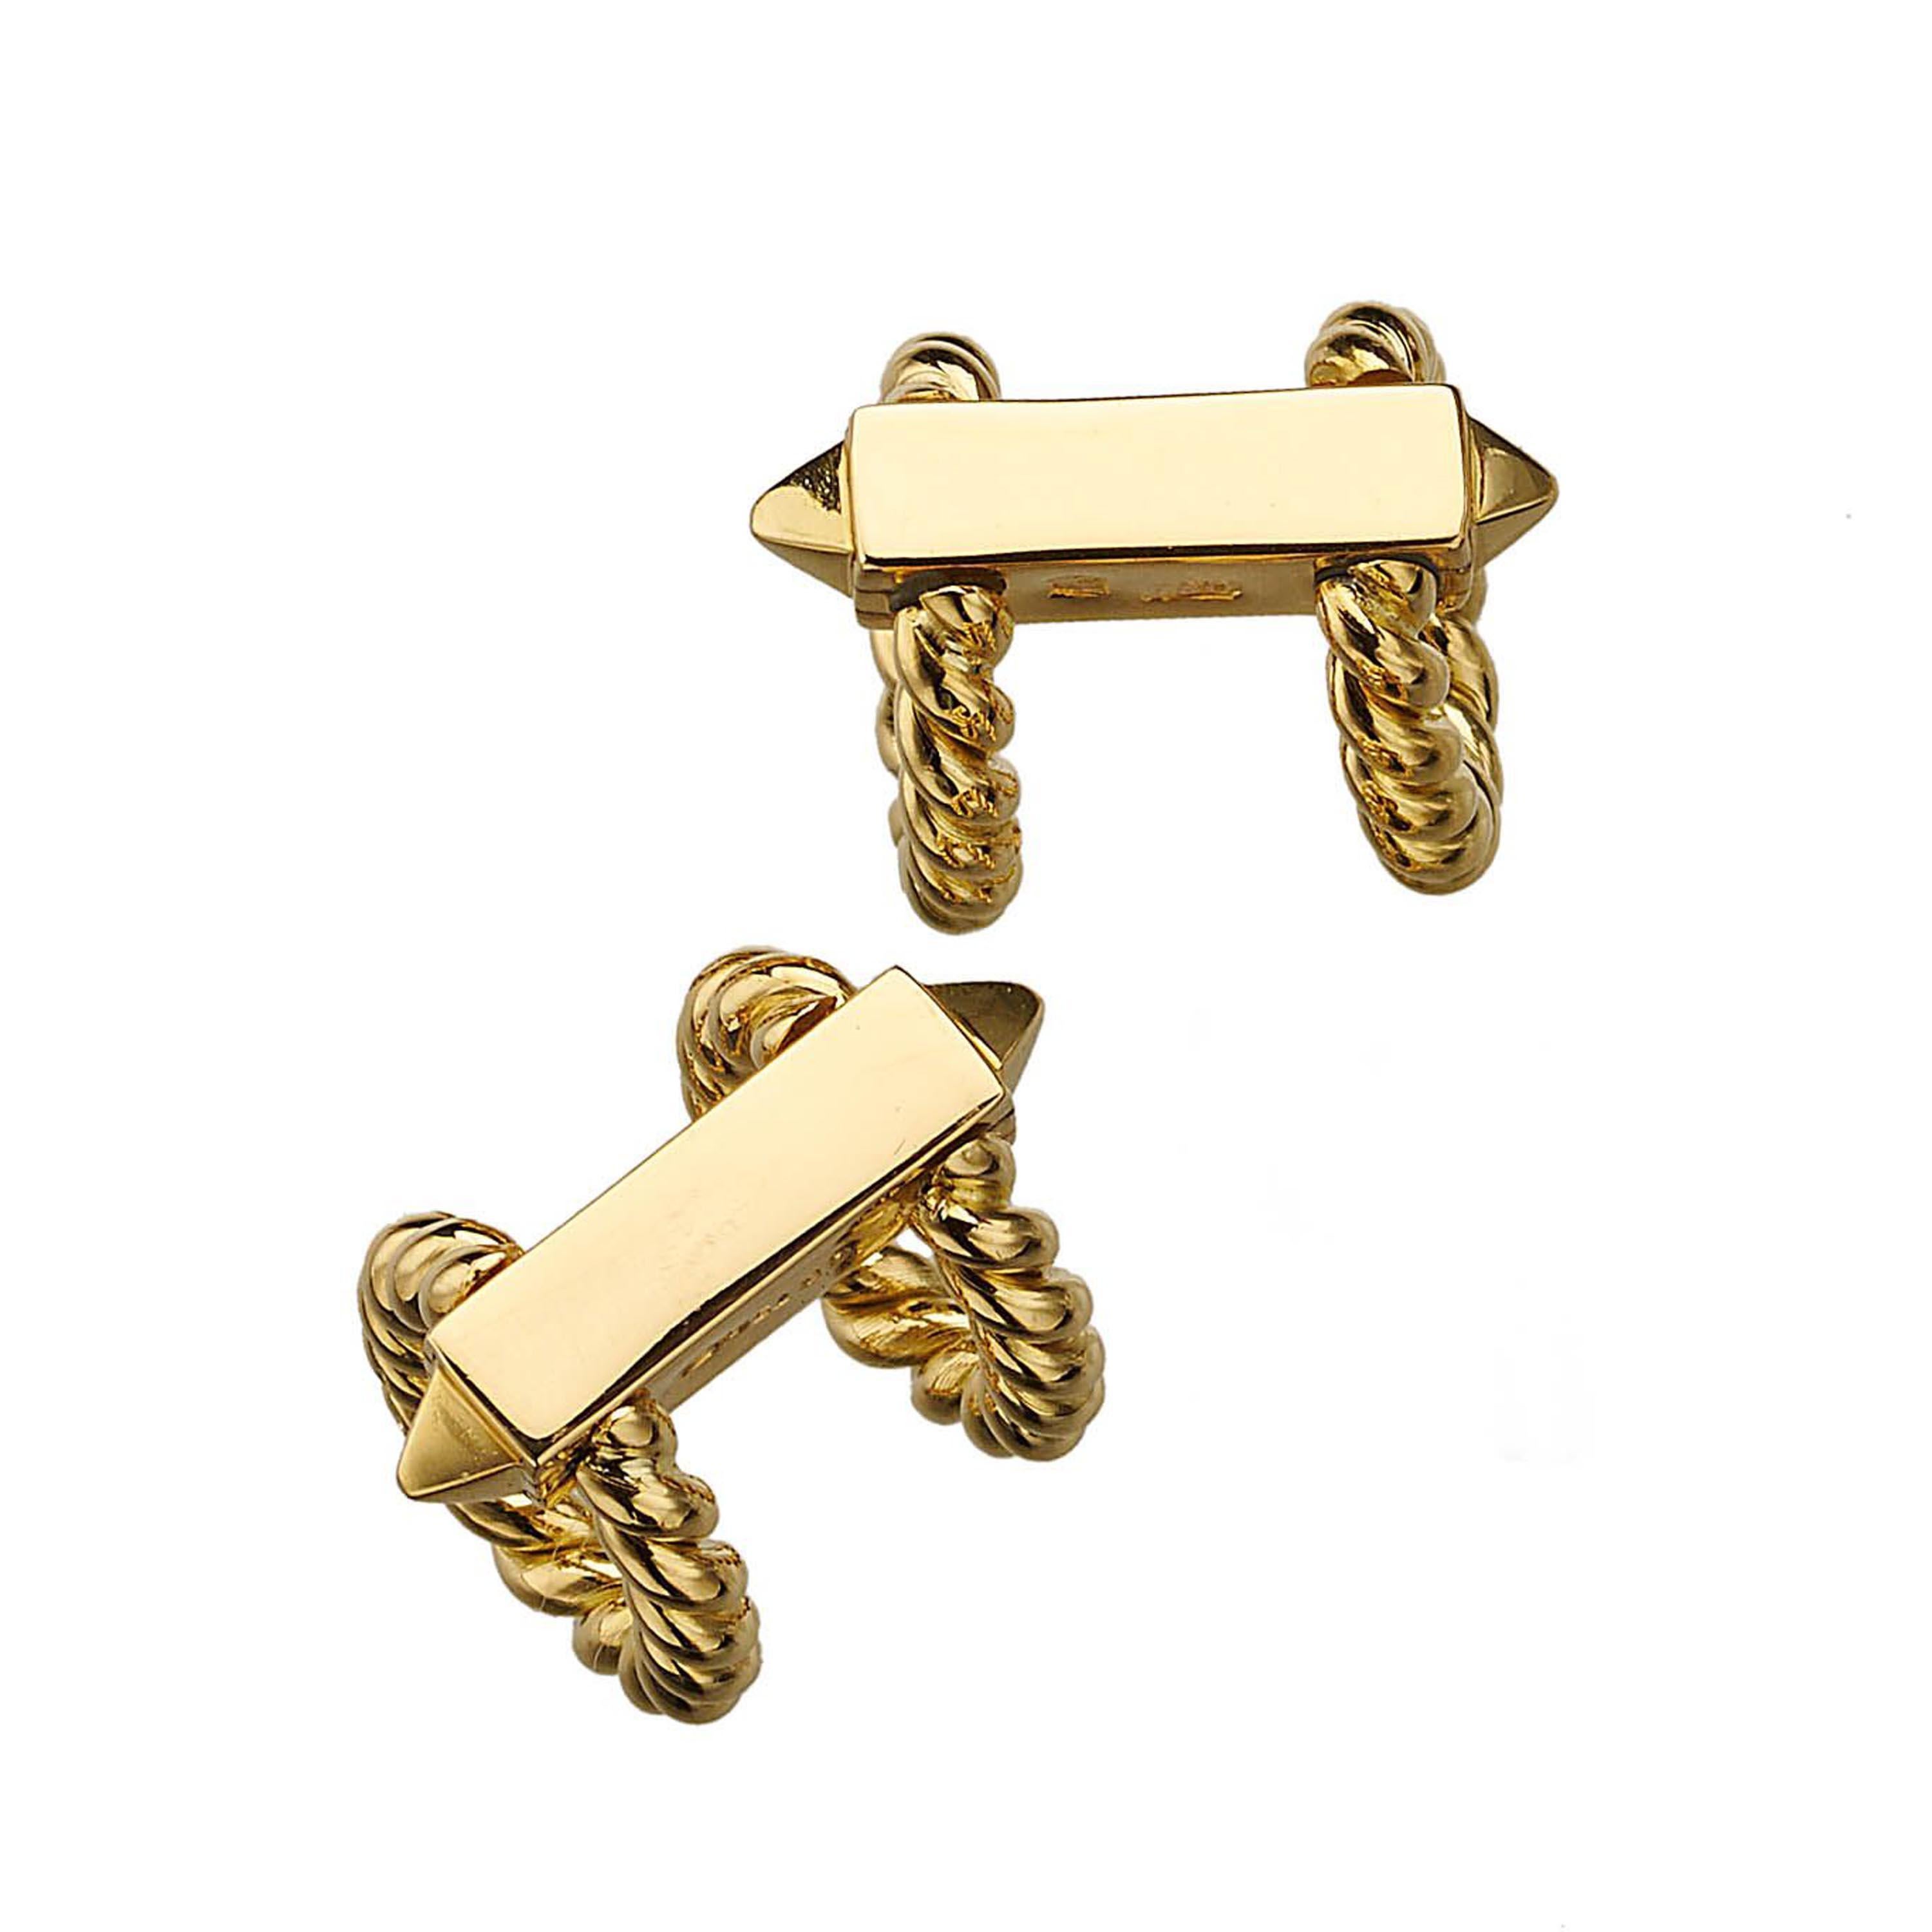 Retro Vintage Boucheron Gold Twisted Rope Cufflinks, with Case, circa 1985 For Sale